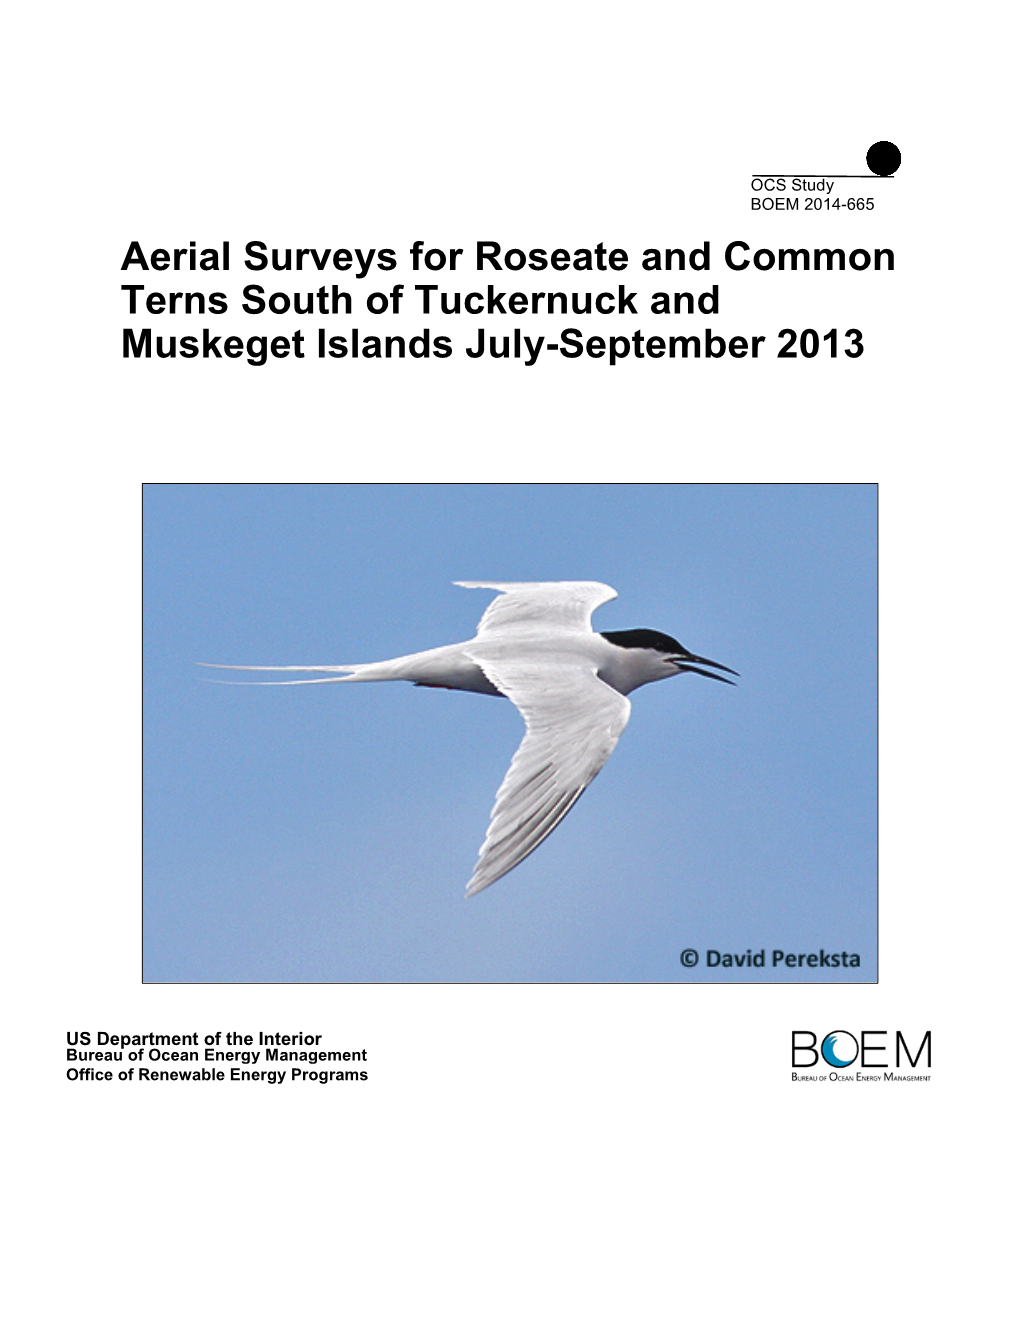 Aerial Surveys for Roseate and Common Terns South of Tuckernuck and Muskeget Islands July-September 2013